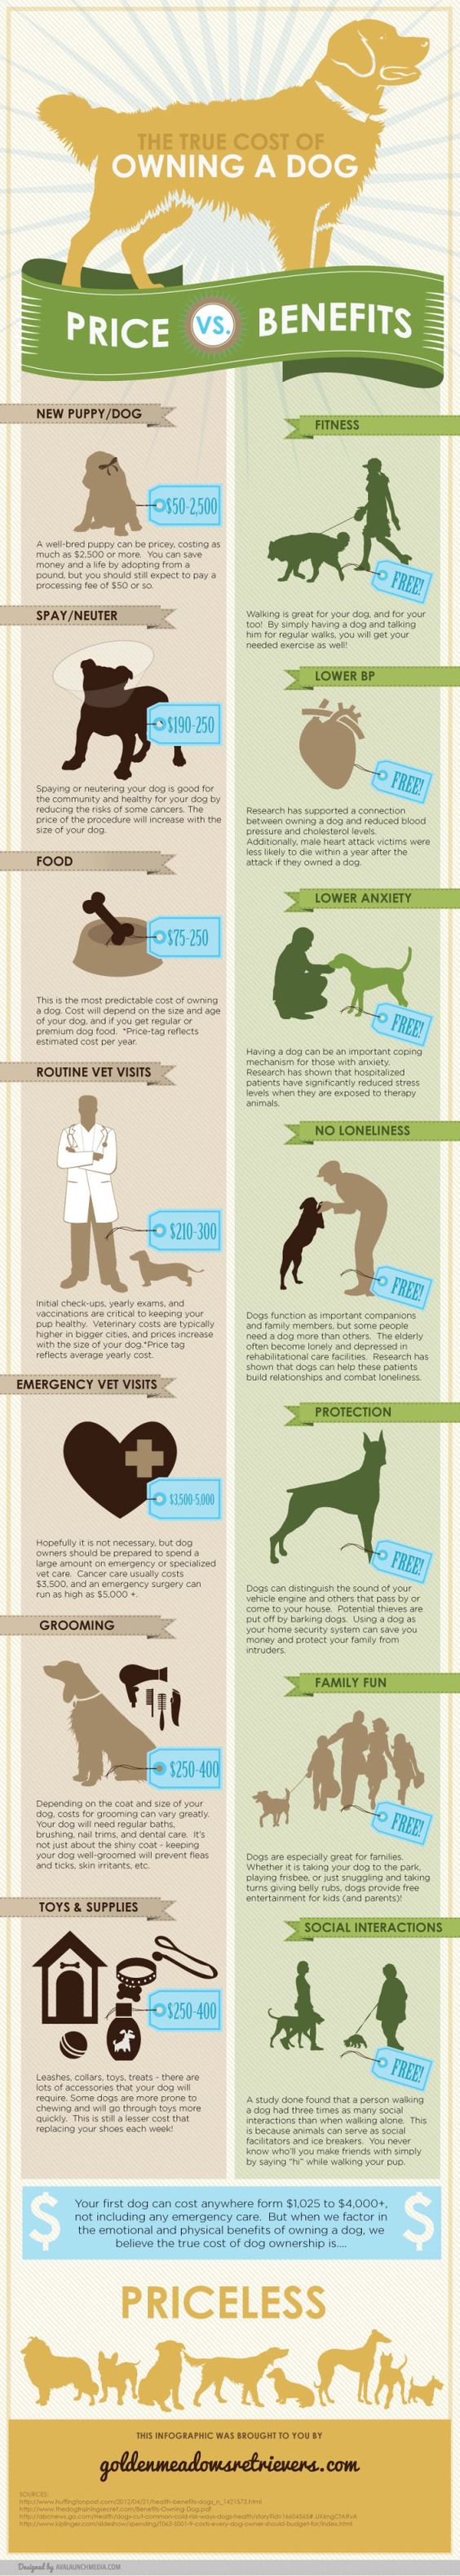 The True Cost of Owning a Dog [INFOGRAPHIC]